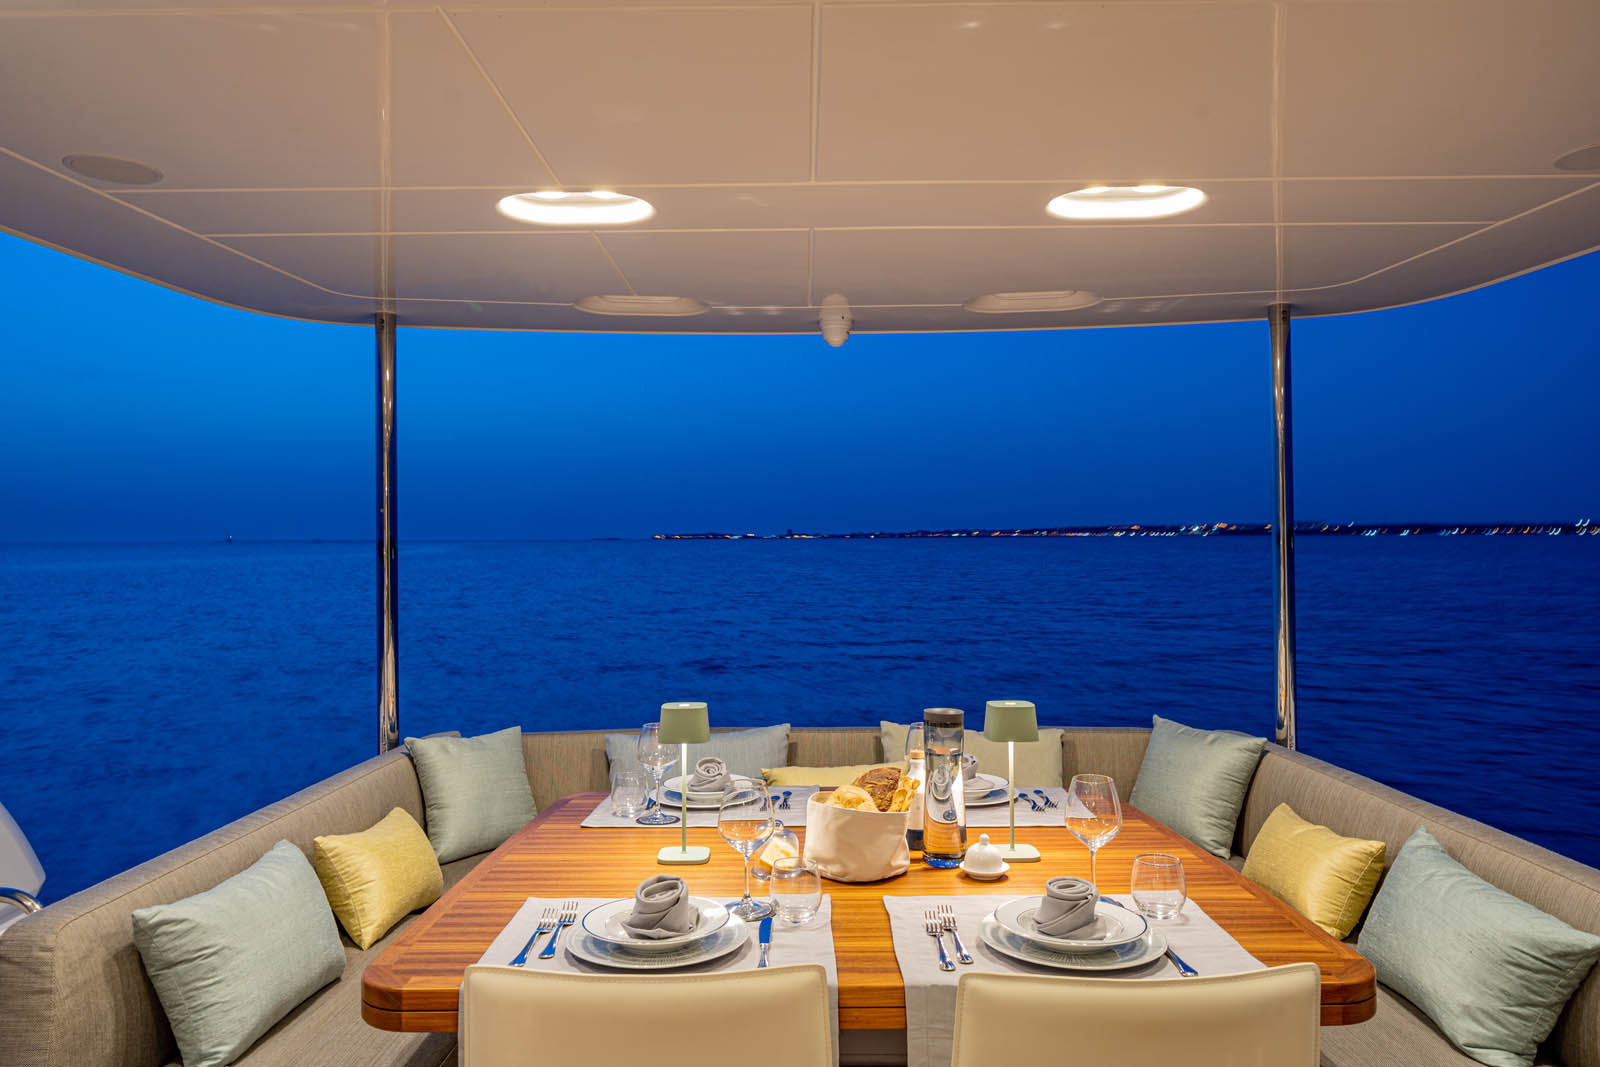 Aft deck dining - the perfect al fresco experience